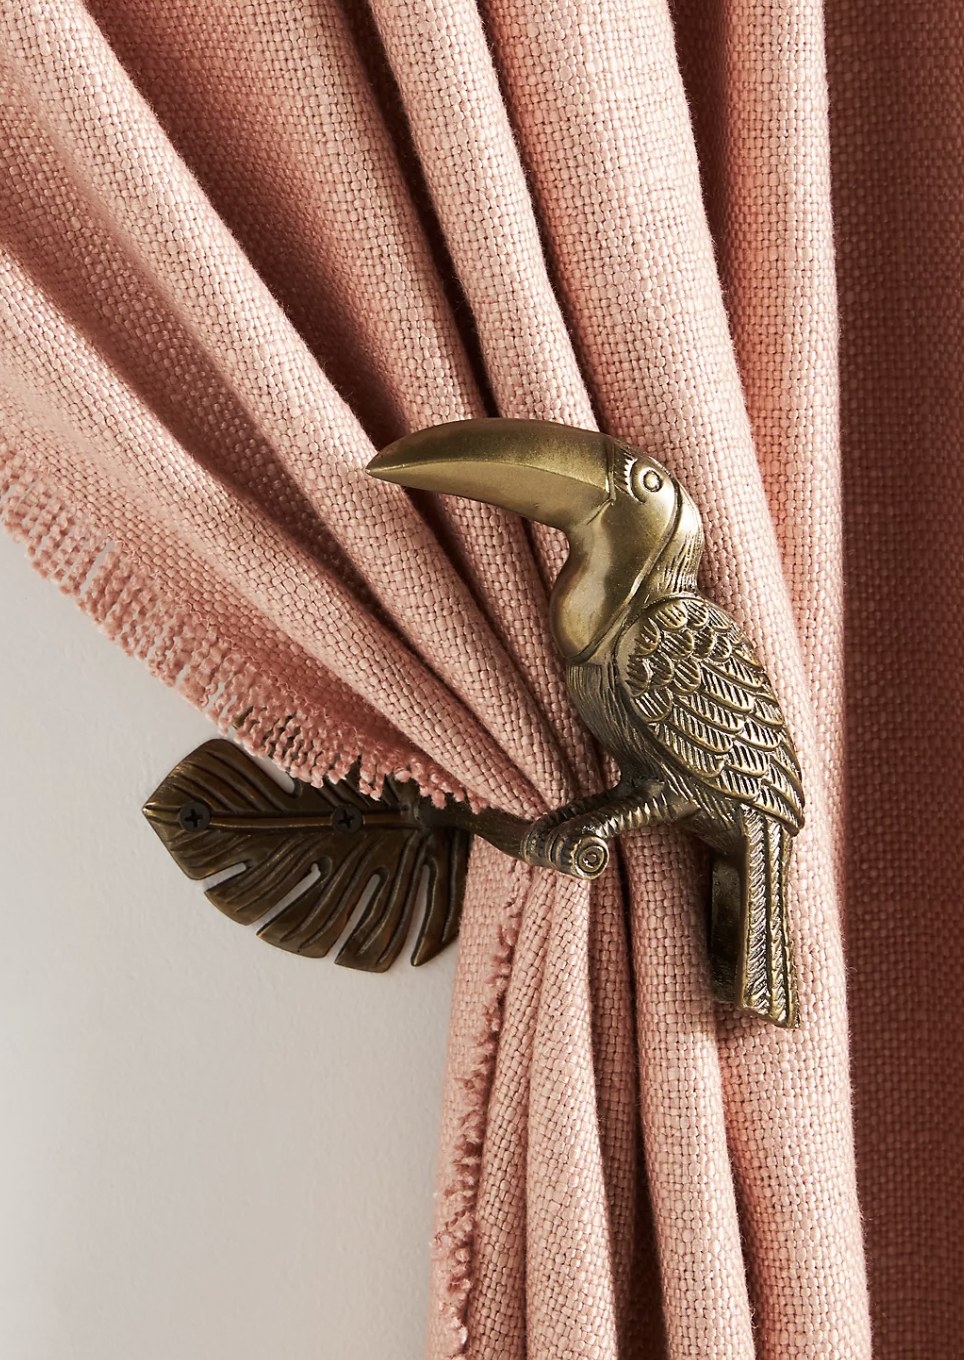 The toucan tying back pink curtains